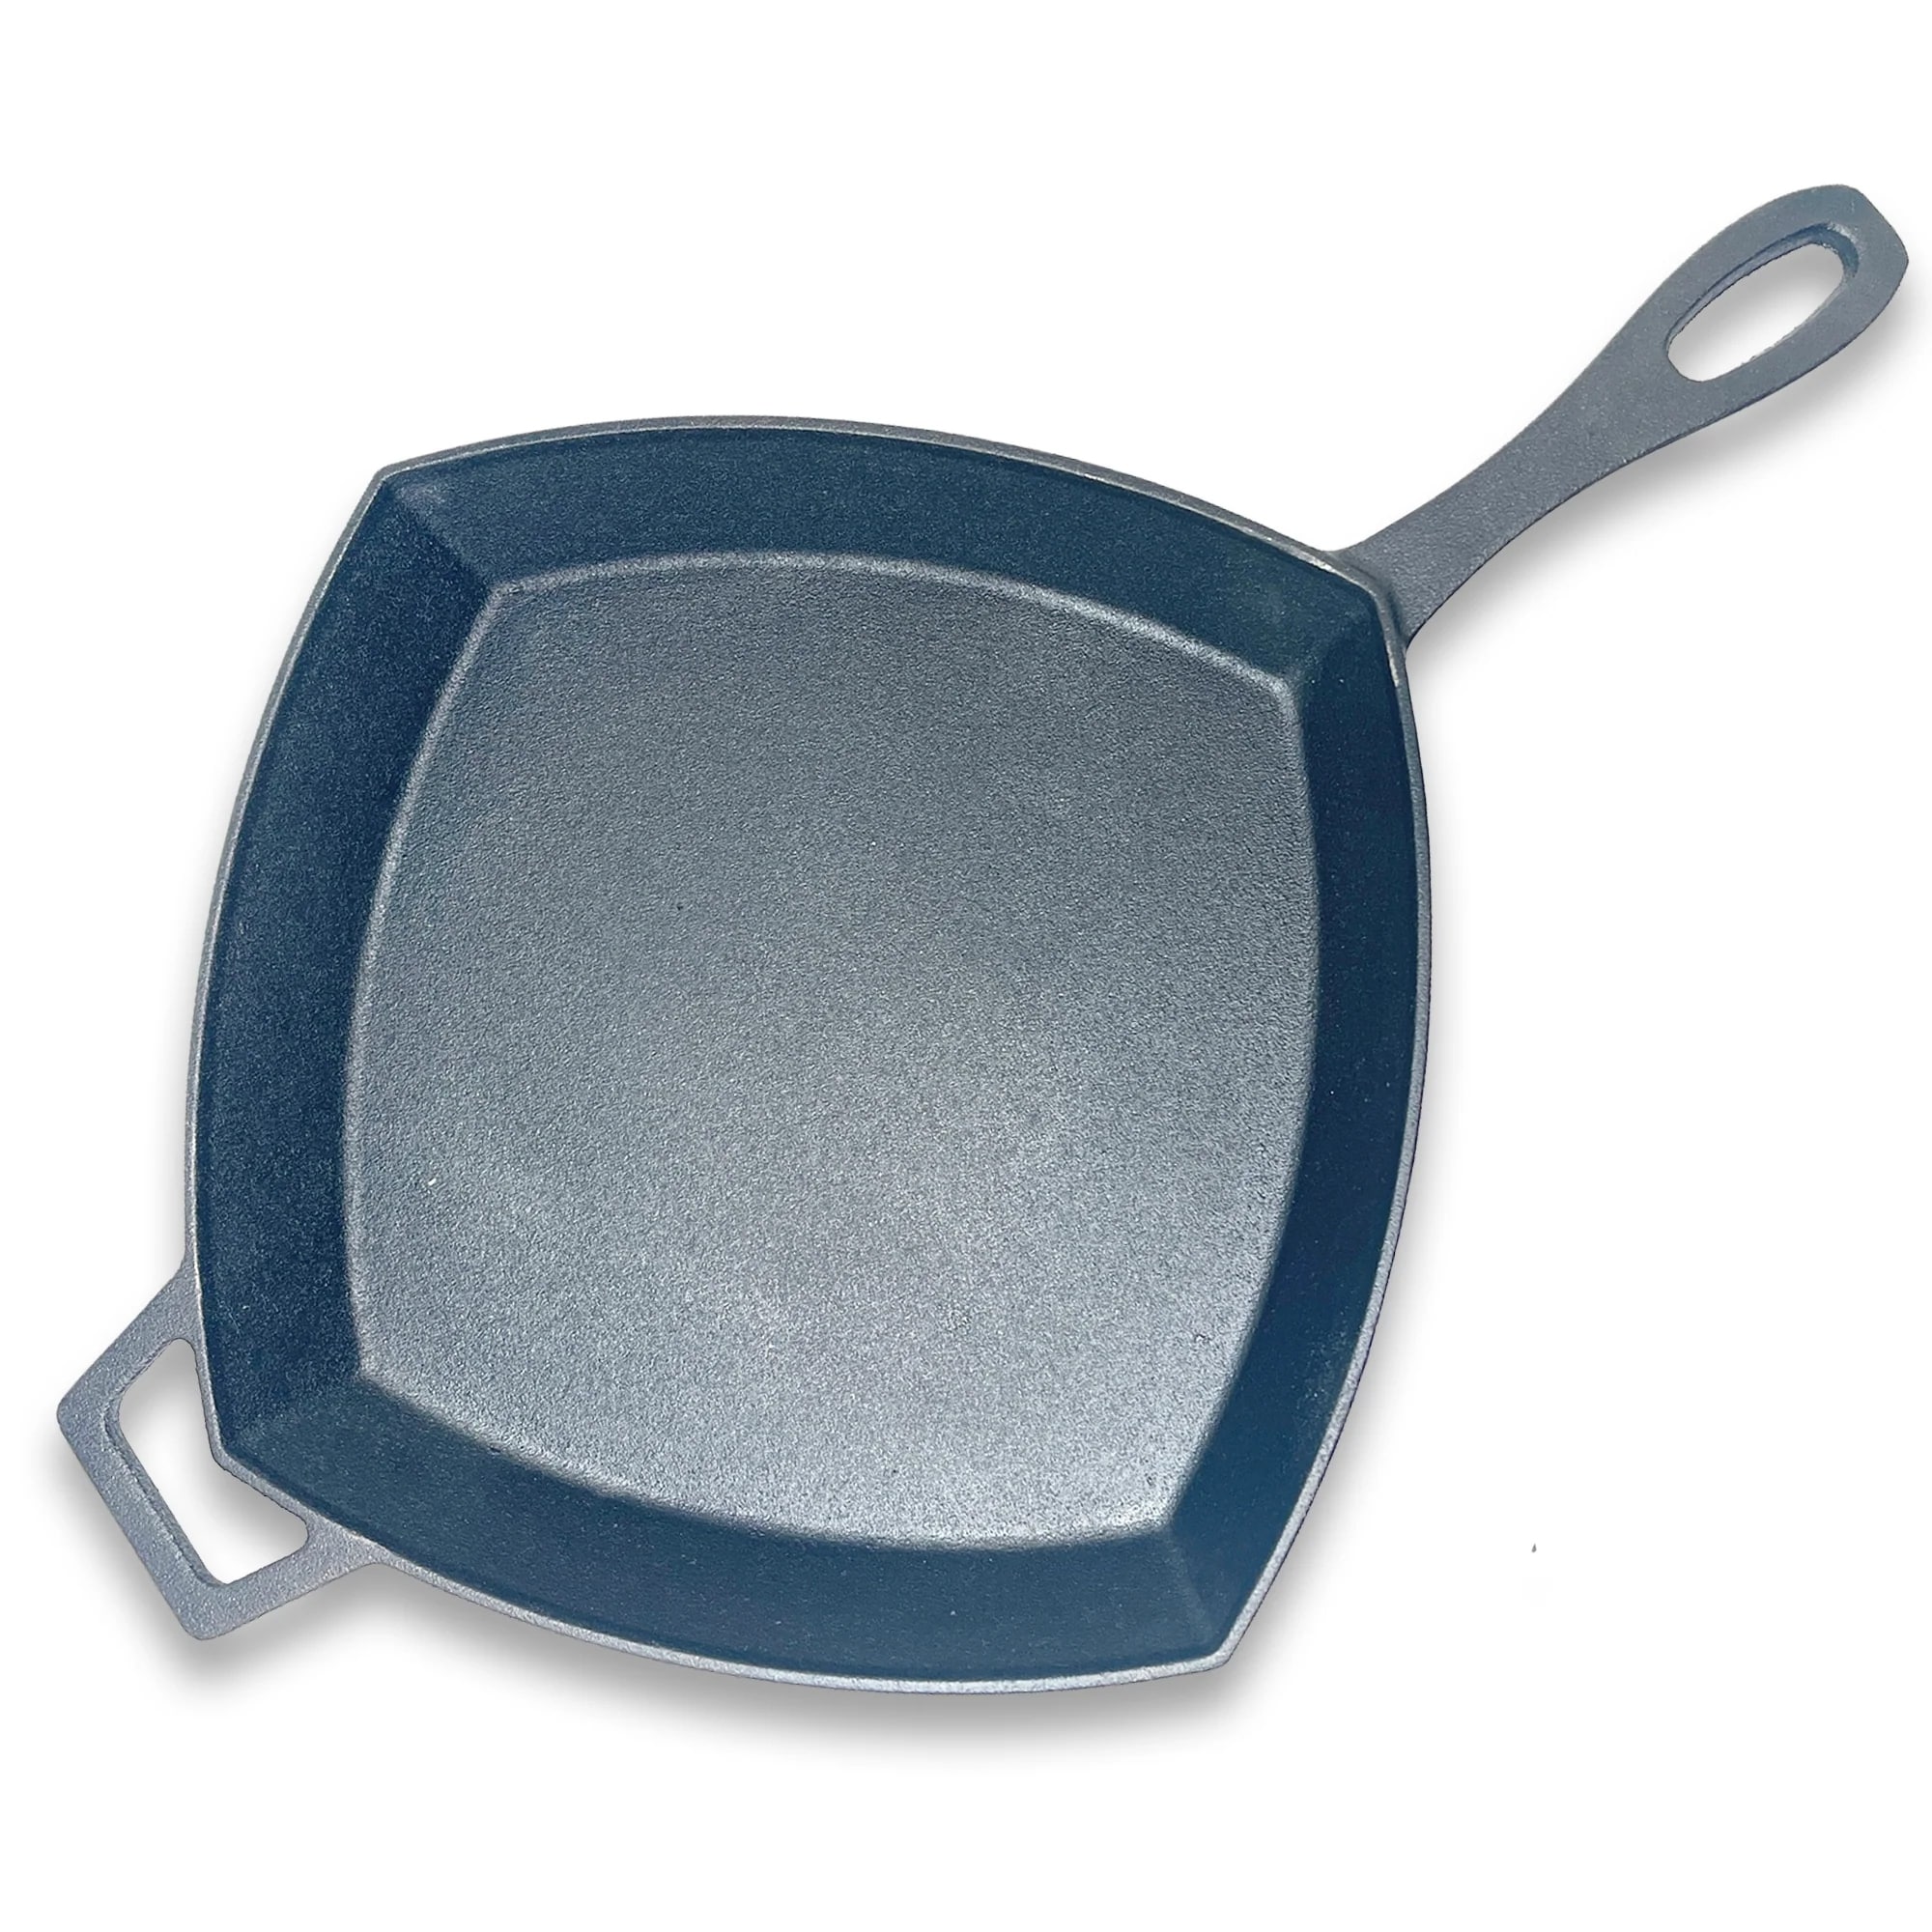 https://ak1.ostkcdn.com/images/products/is/images/direct/f1ecbe291ffbbbab9e8966287d282003bedaa479/Bayou-Classic-12-Inch-Square-Cast-Iron-Cooking-Skillet-Pan-with-Helper-Handle.jpg